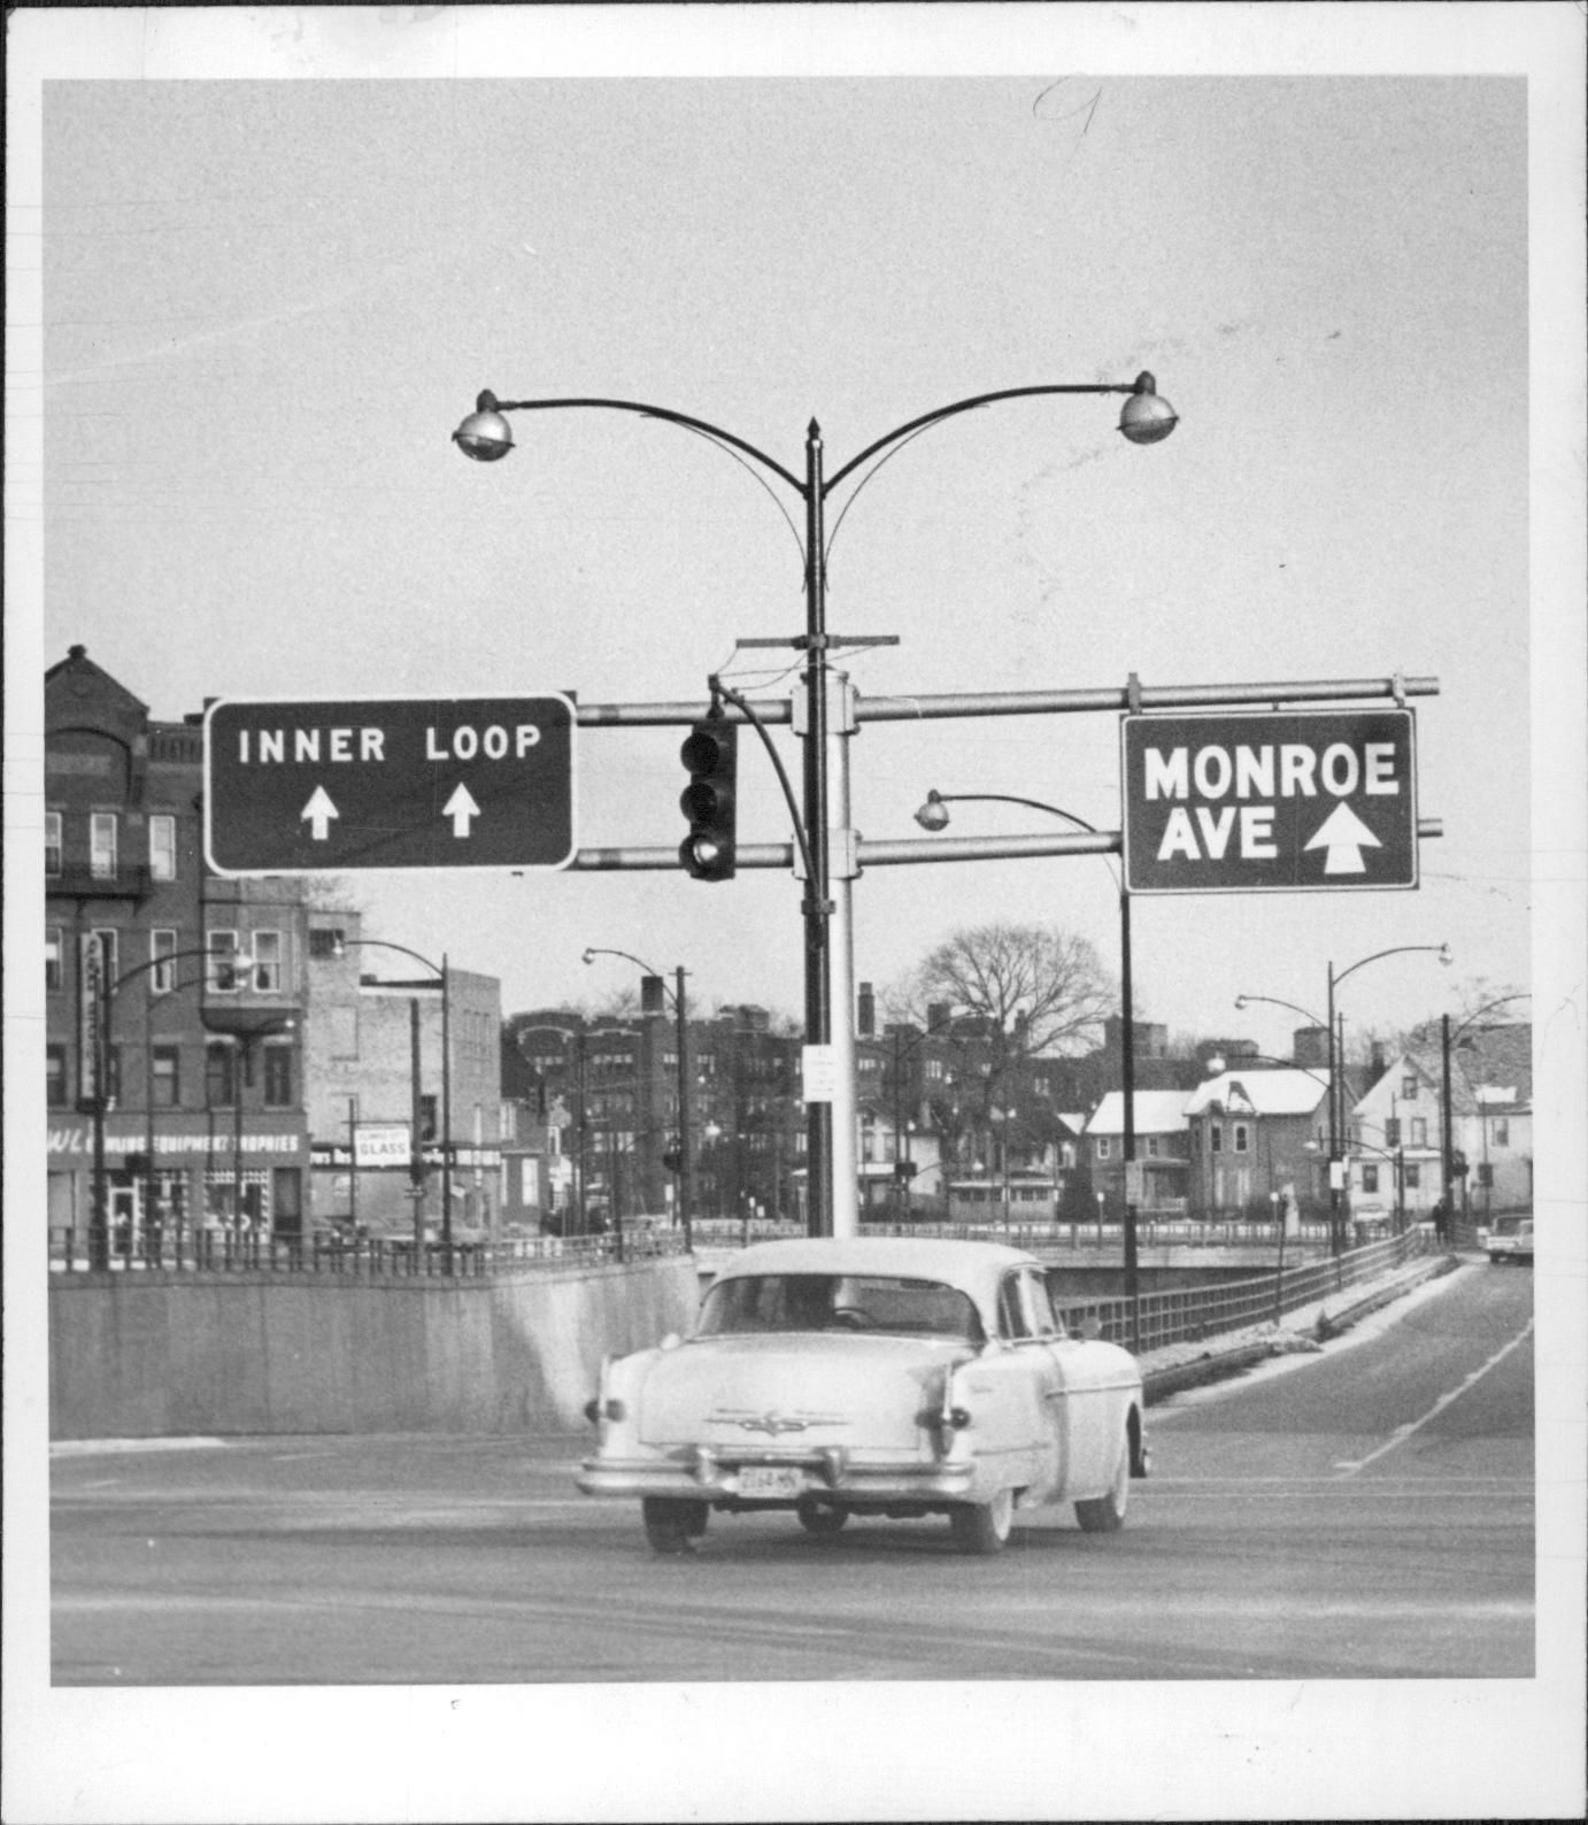 Rochester Ny History A Look At Life Here In The 1960s